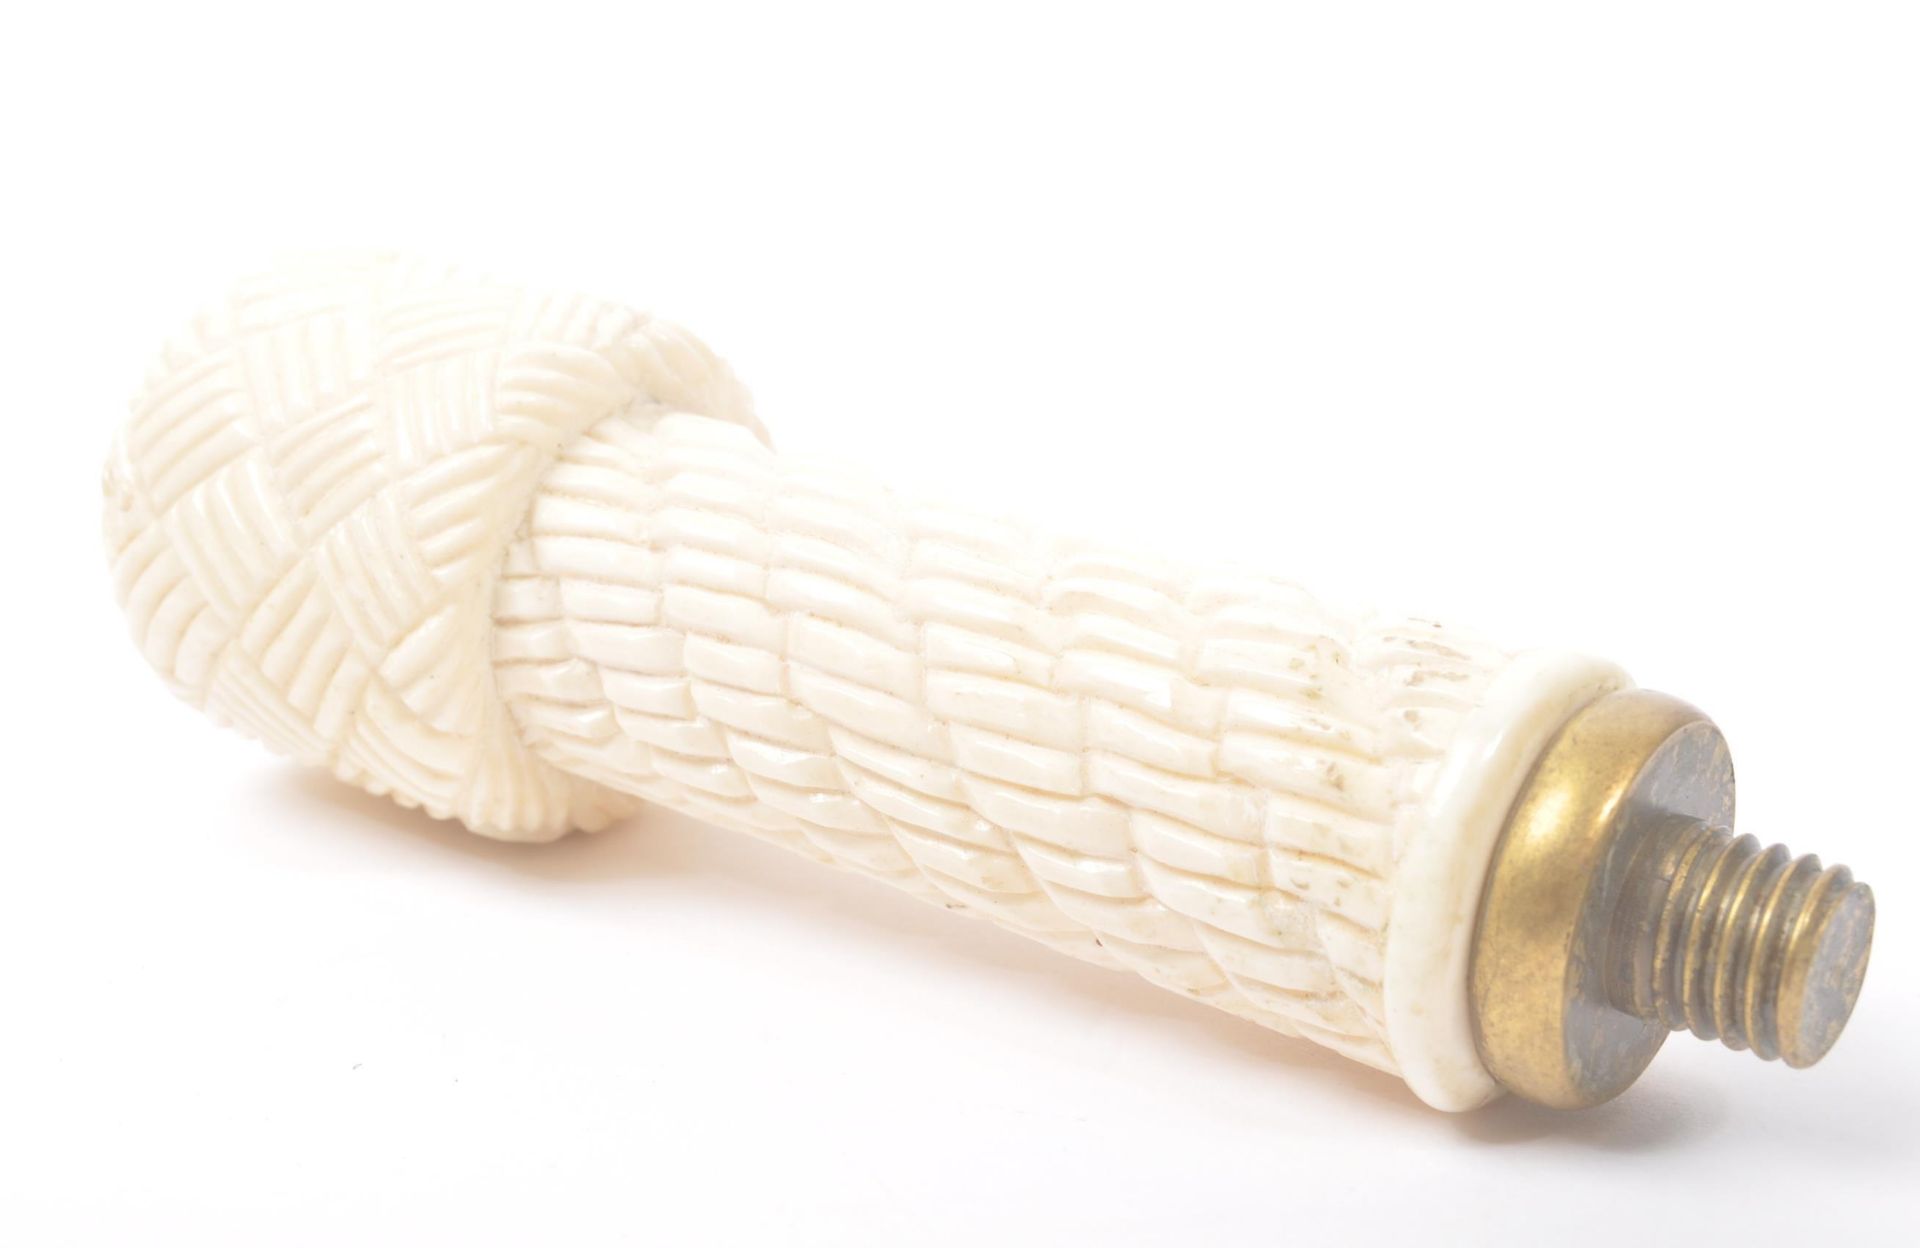 VINTAGE CARVED BONE CANE HANDLE WITH PLAID PATTERN - Image 4 of 4